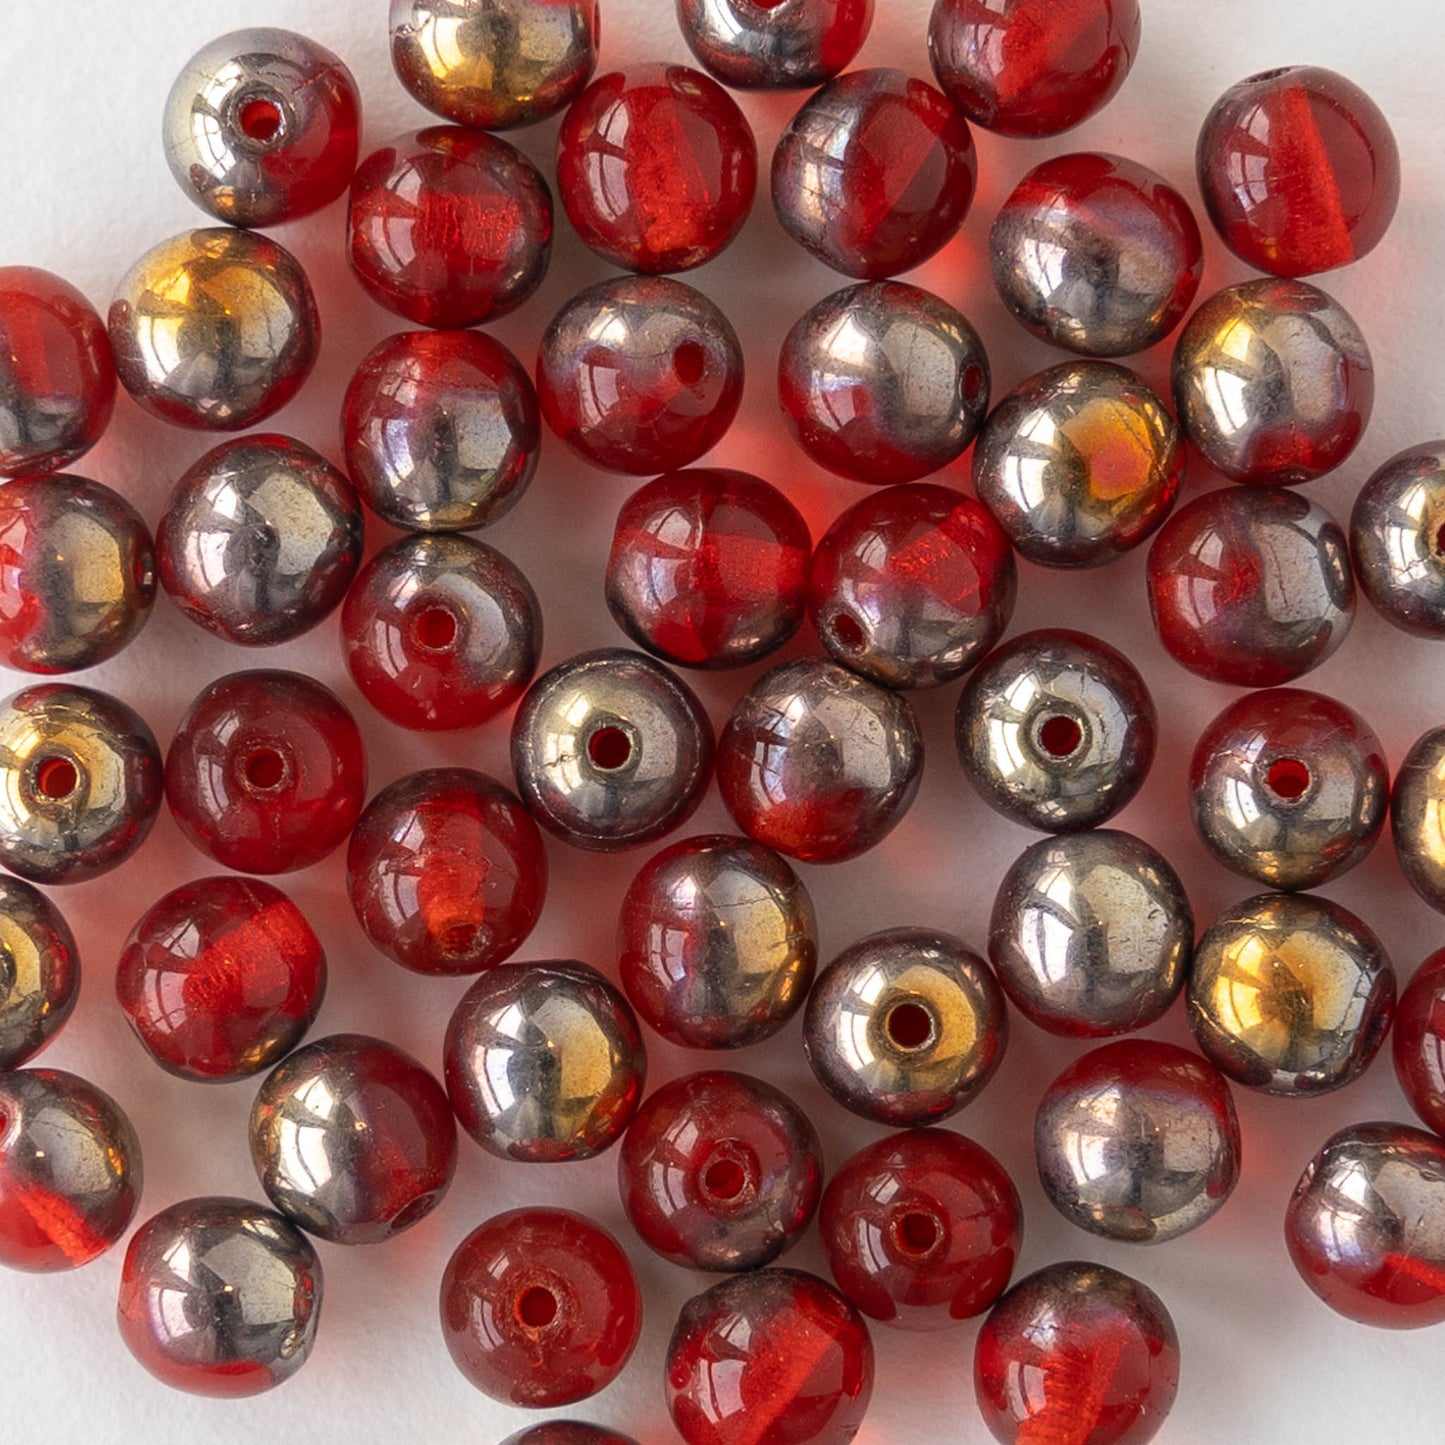 5mm Round Glass Beads - Red with Gold Finish - 100 beads